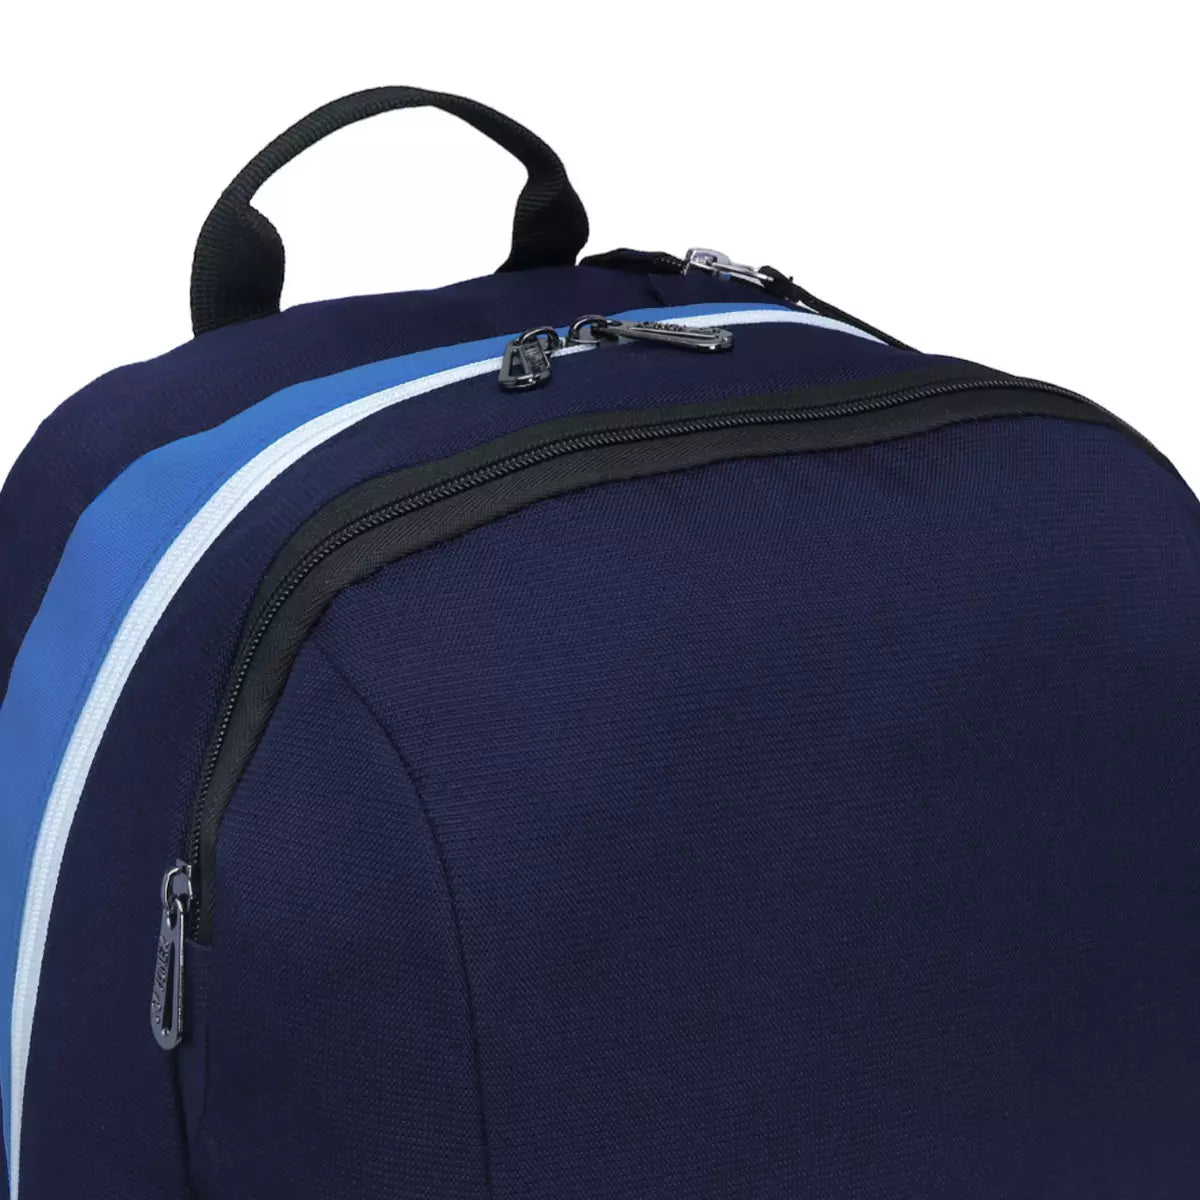 ACTIVE BACKPACK S